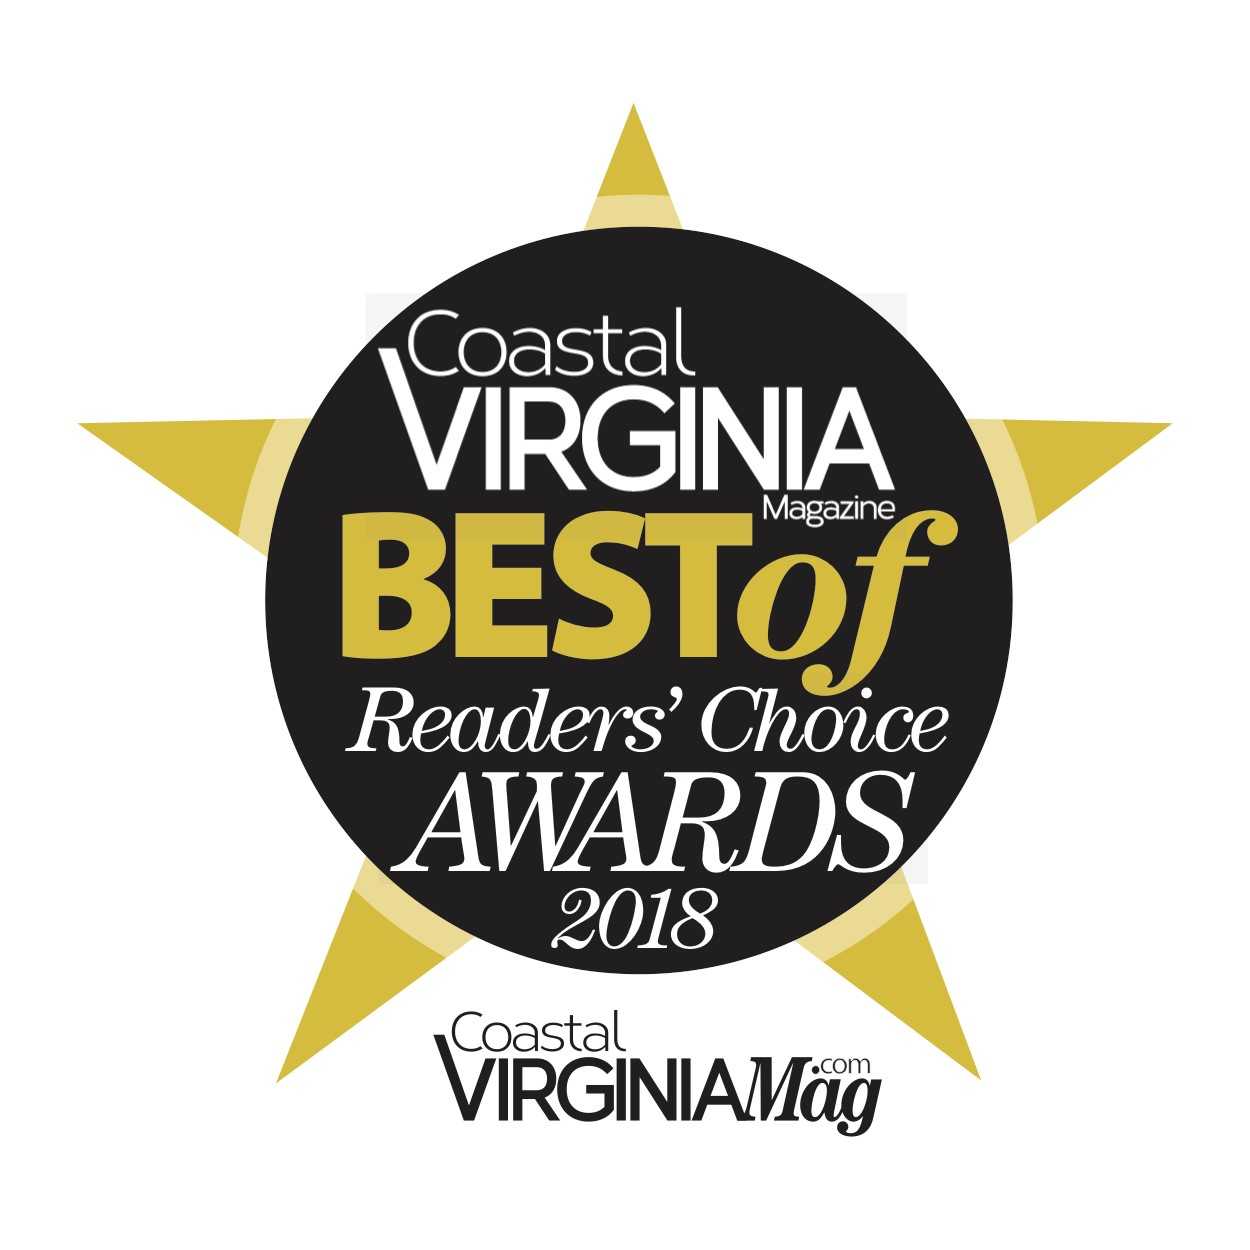 Tidewater Roofing was chosen for Best of Readers’ Choice Awards 2017 by Coastal Virginia Magazine